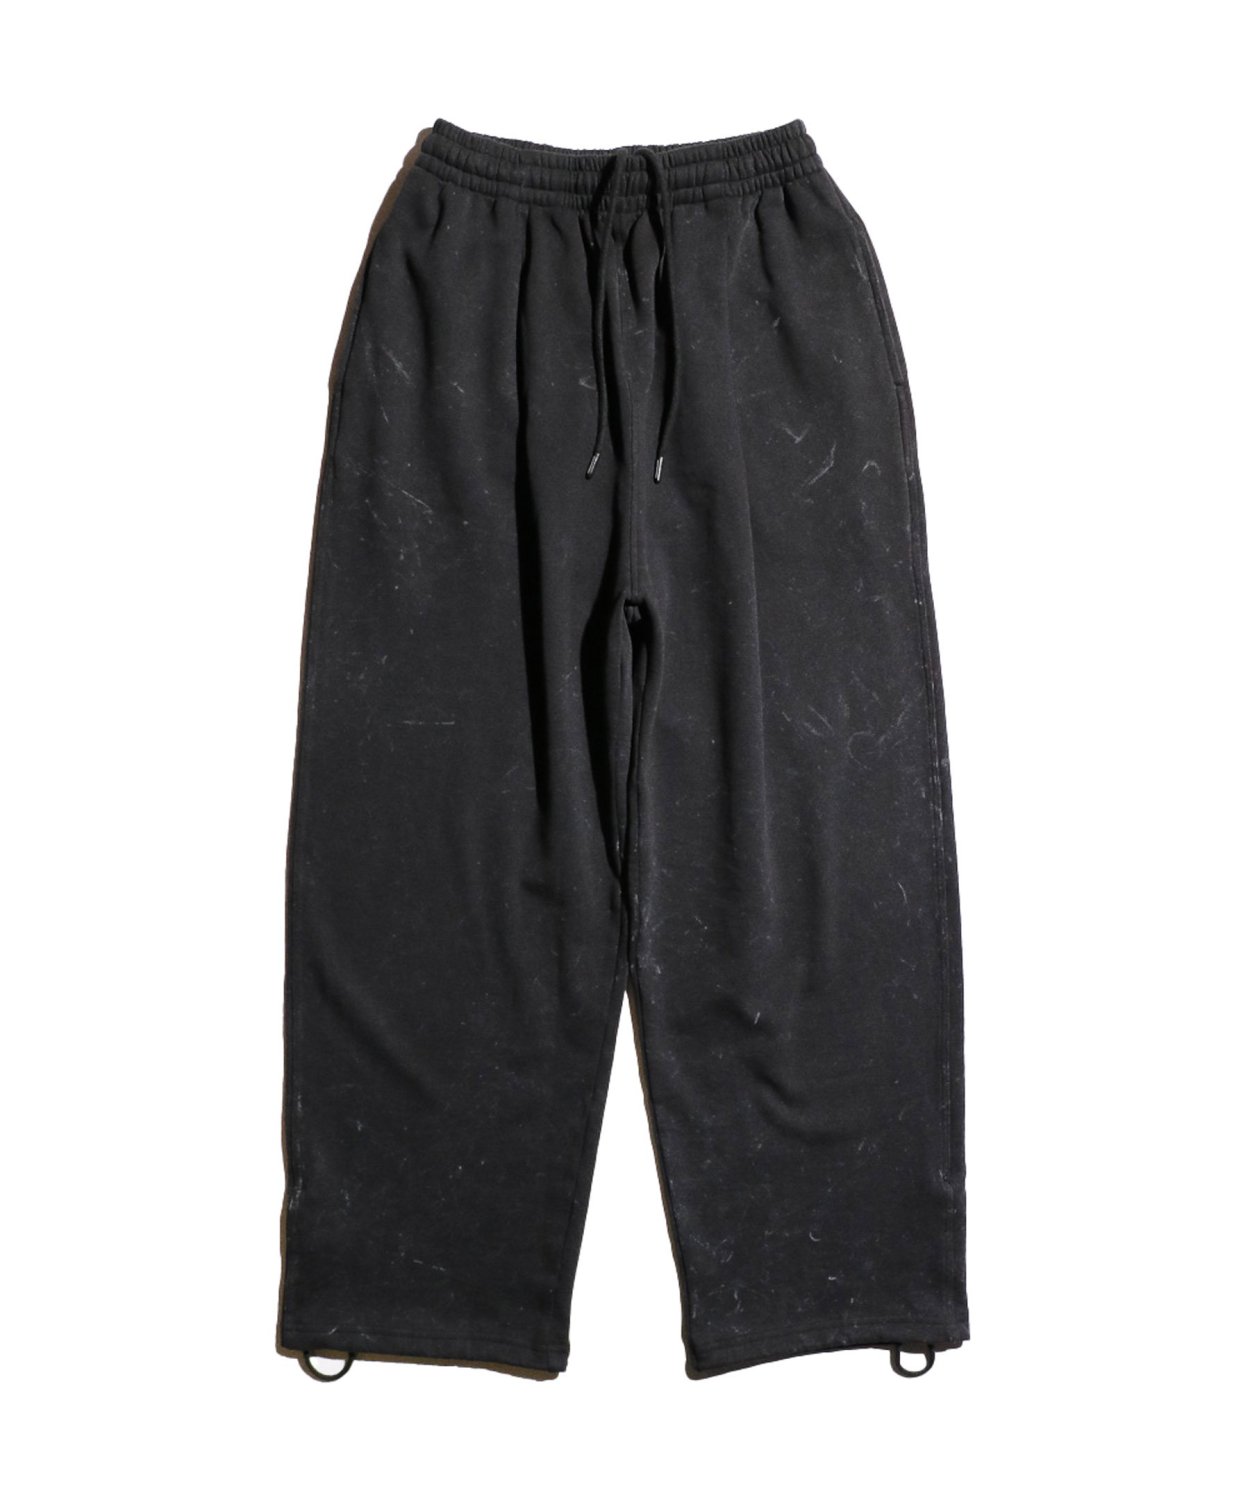 WILLY CHAVARRIA / NORTH SIDER JOGGER PANTS